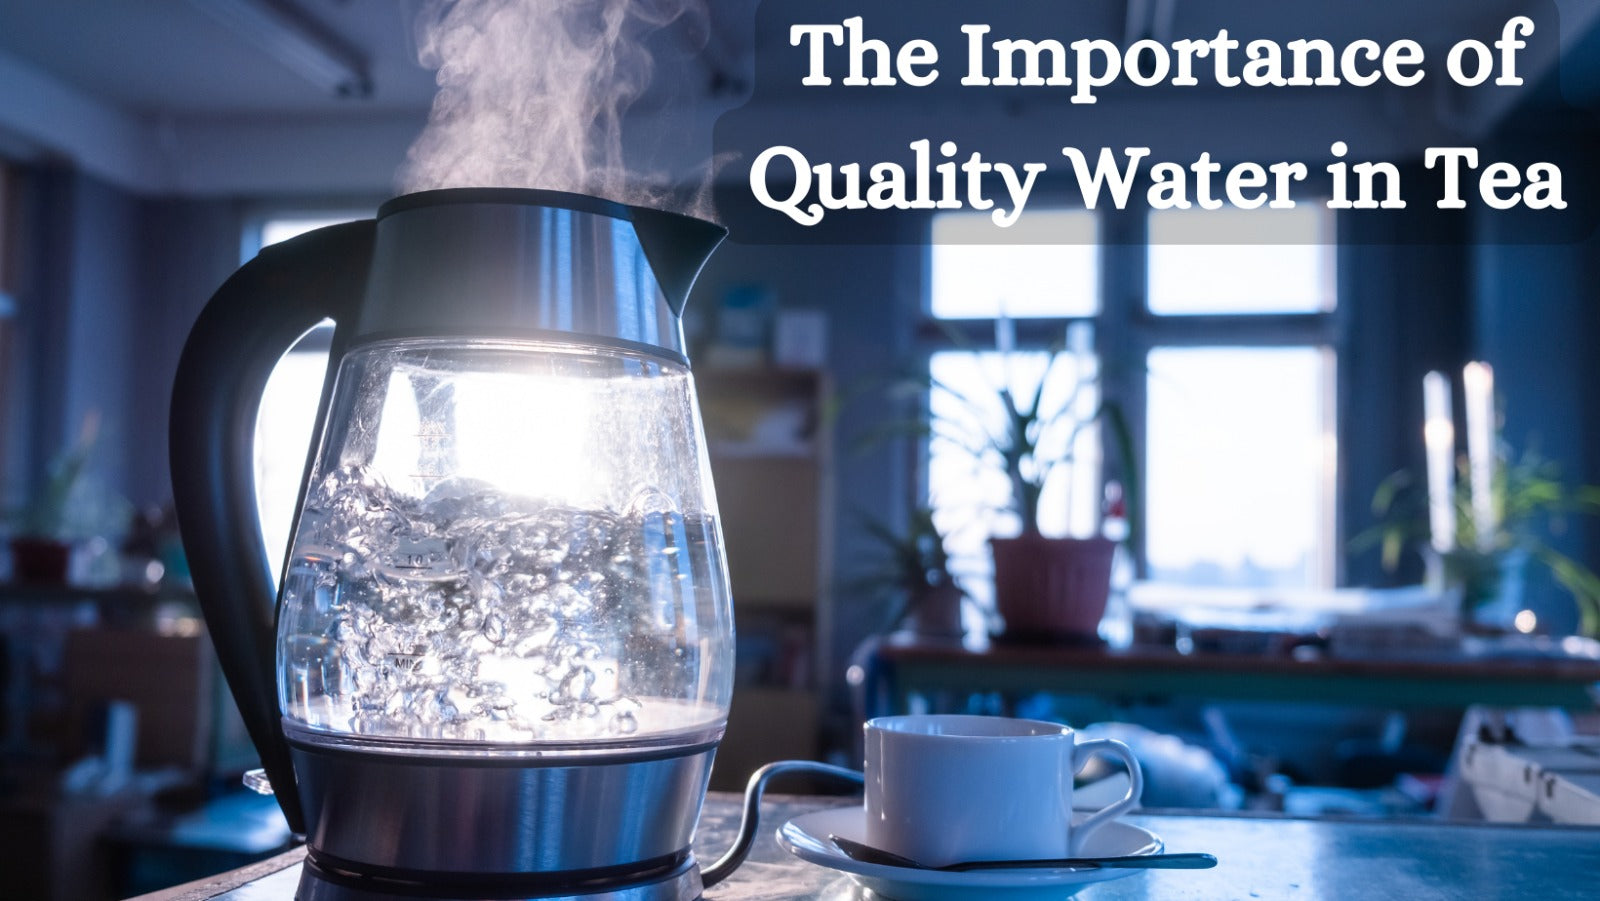 The Importance of Quality Water in Tea